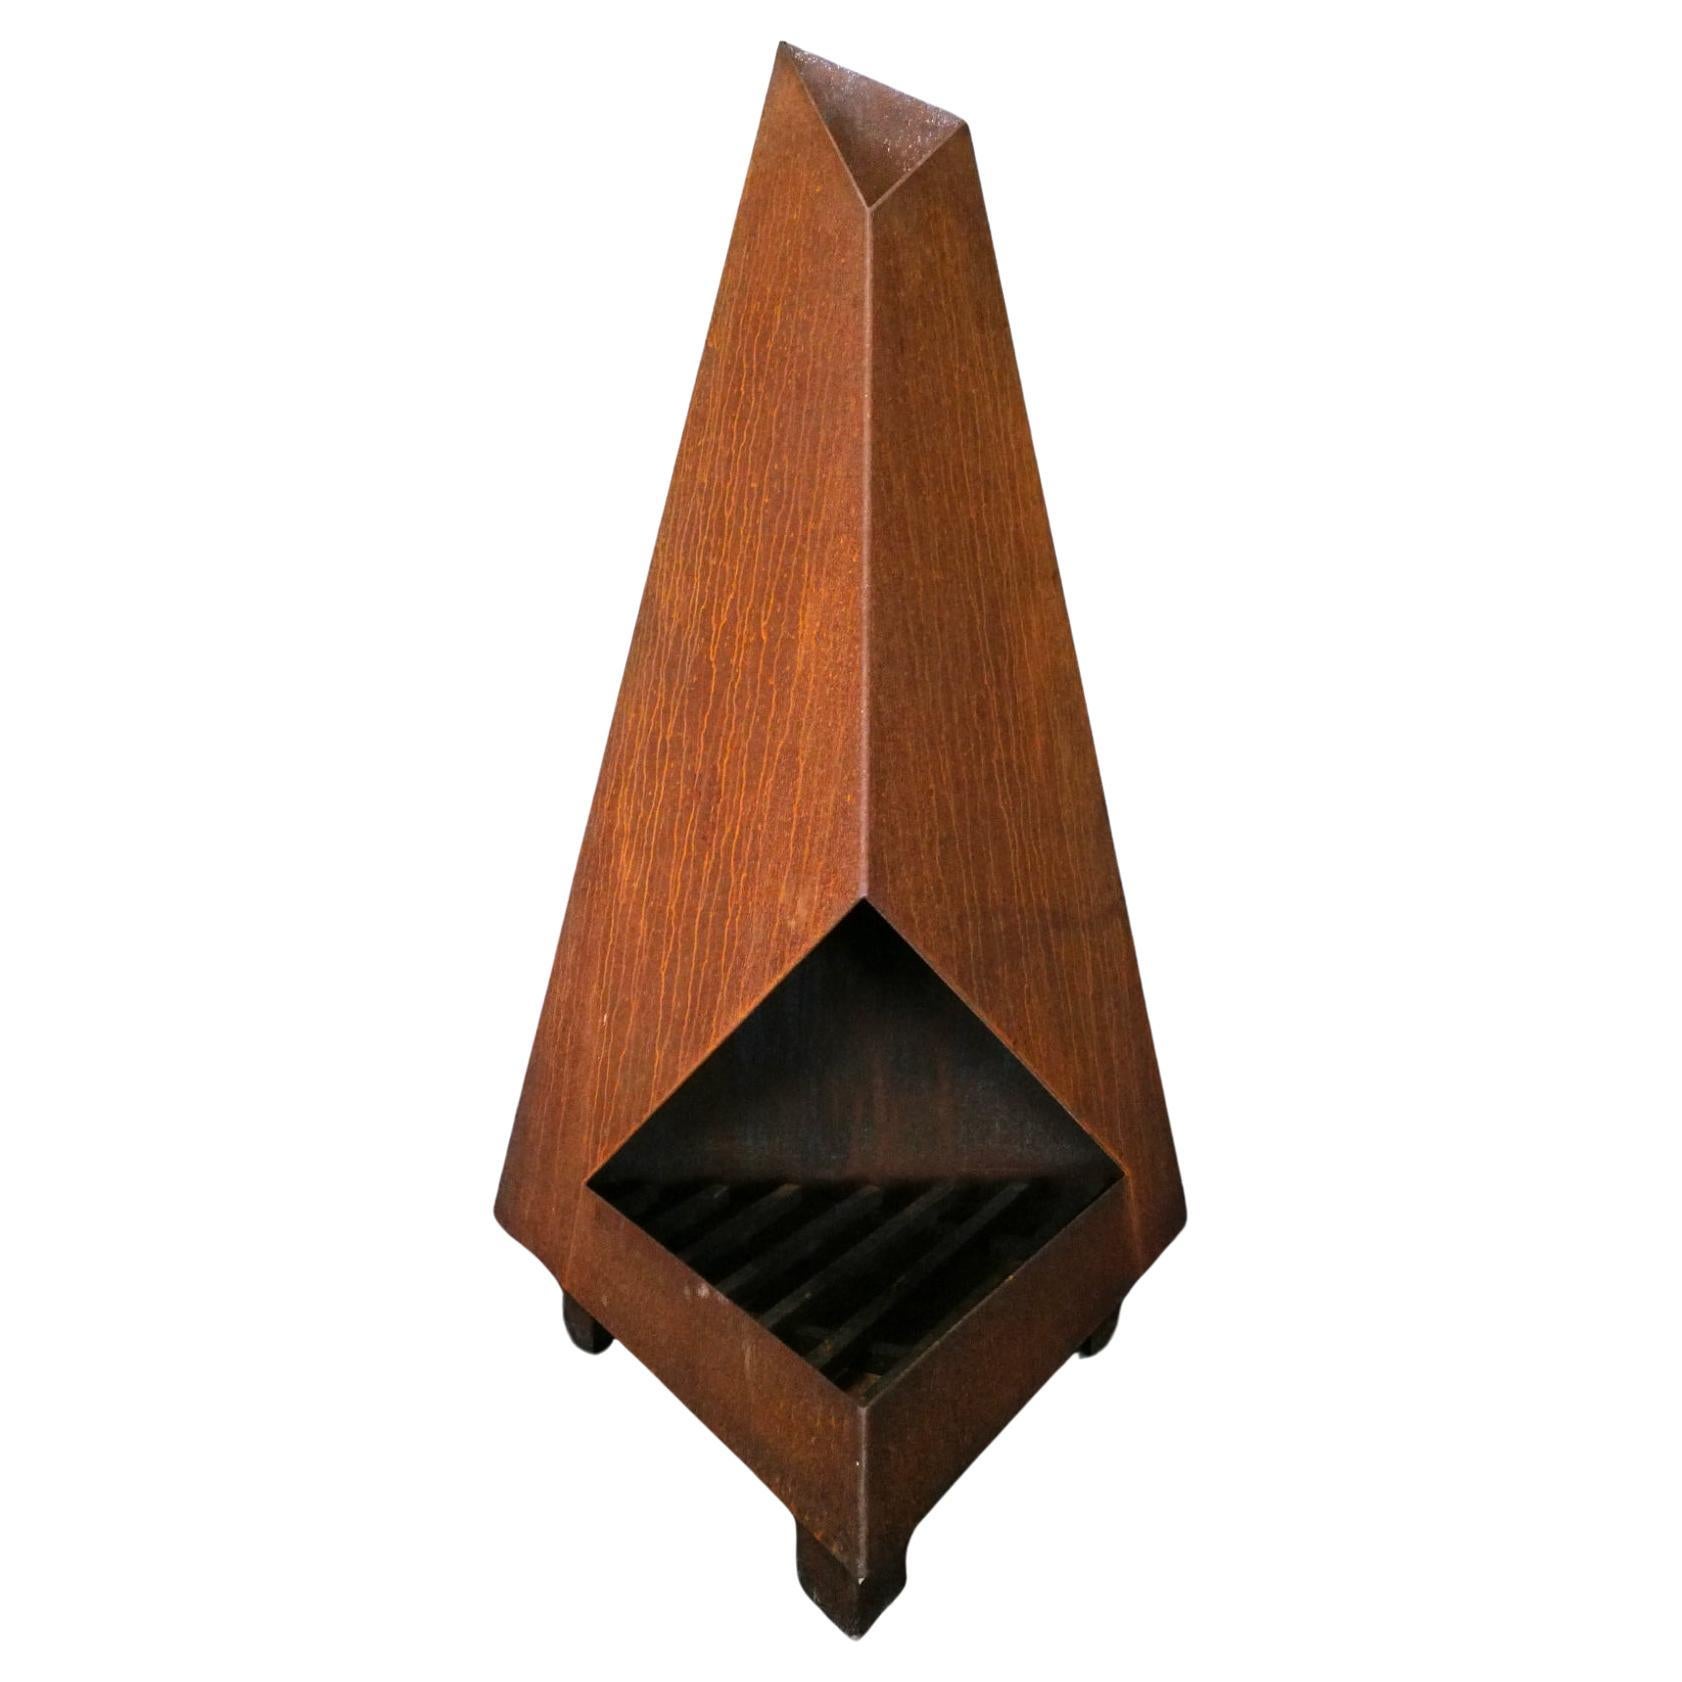 Steel Outdoor Fireplace Chiminea For Sale